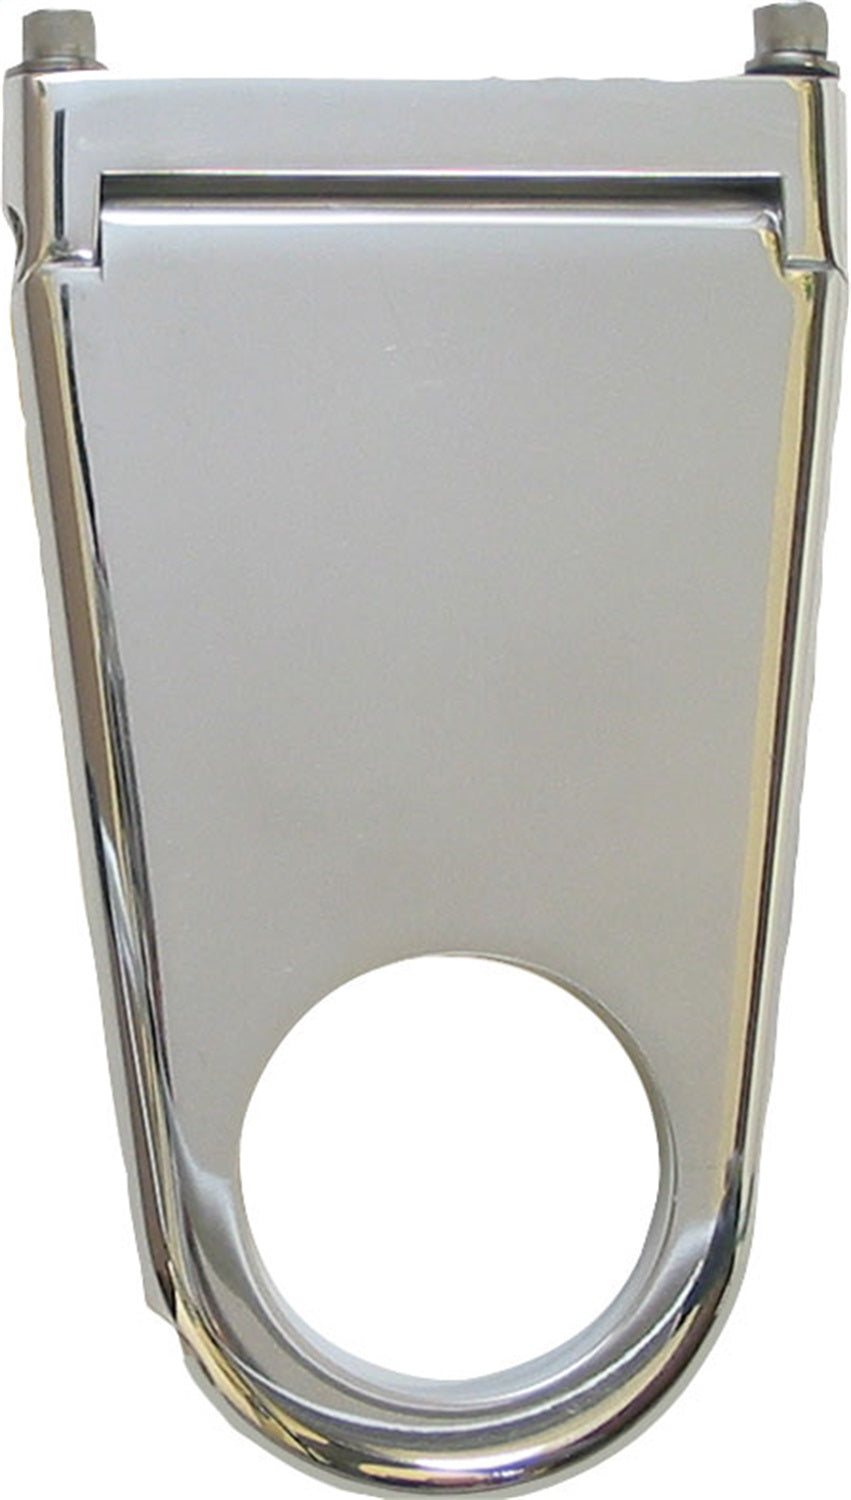 Borgeson Column Drop Blank Style 2-1/4in. Column X 6in. Drop Polished Aluminum 911226